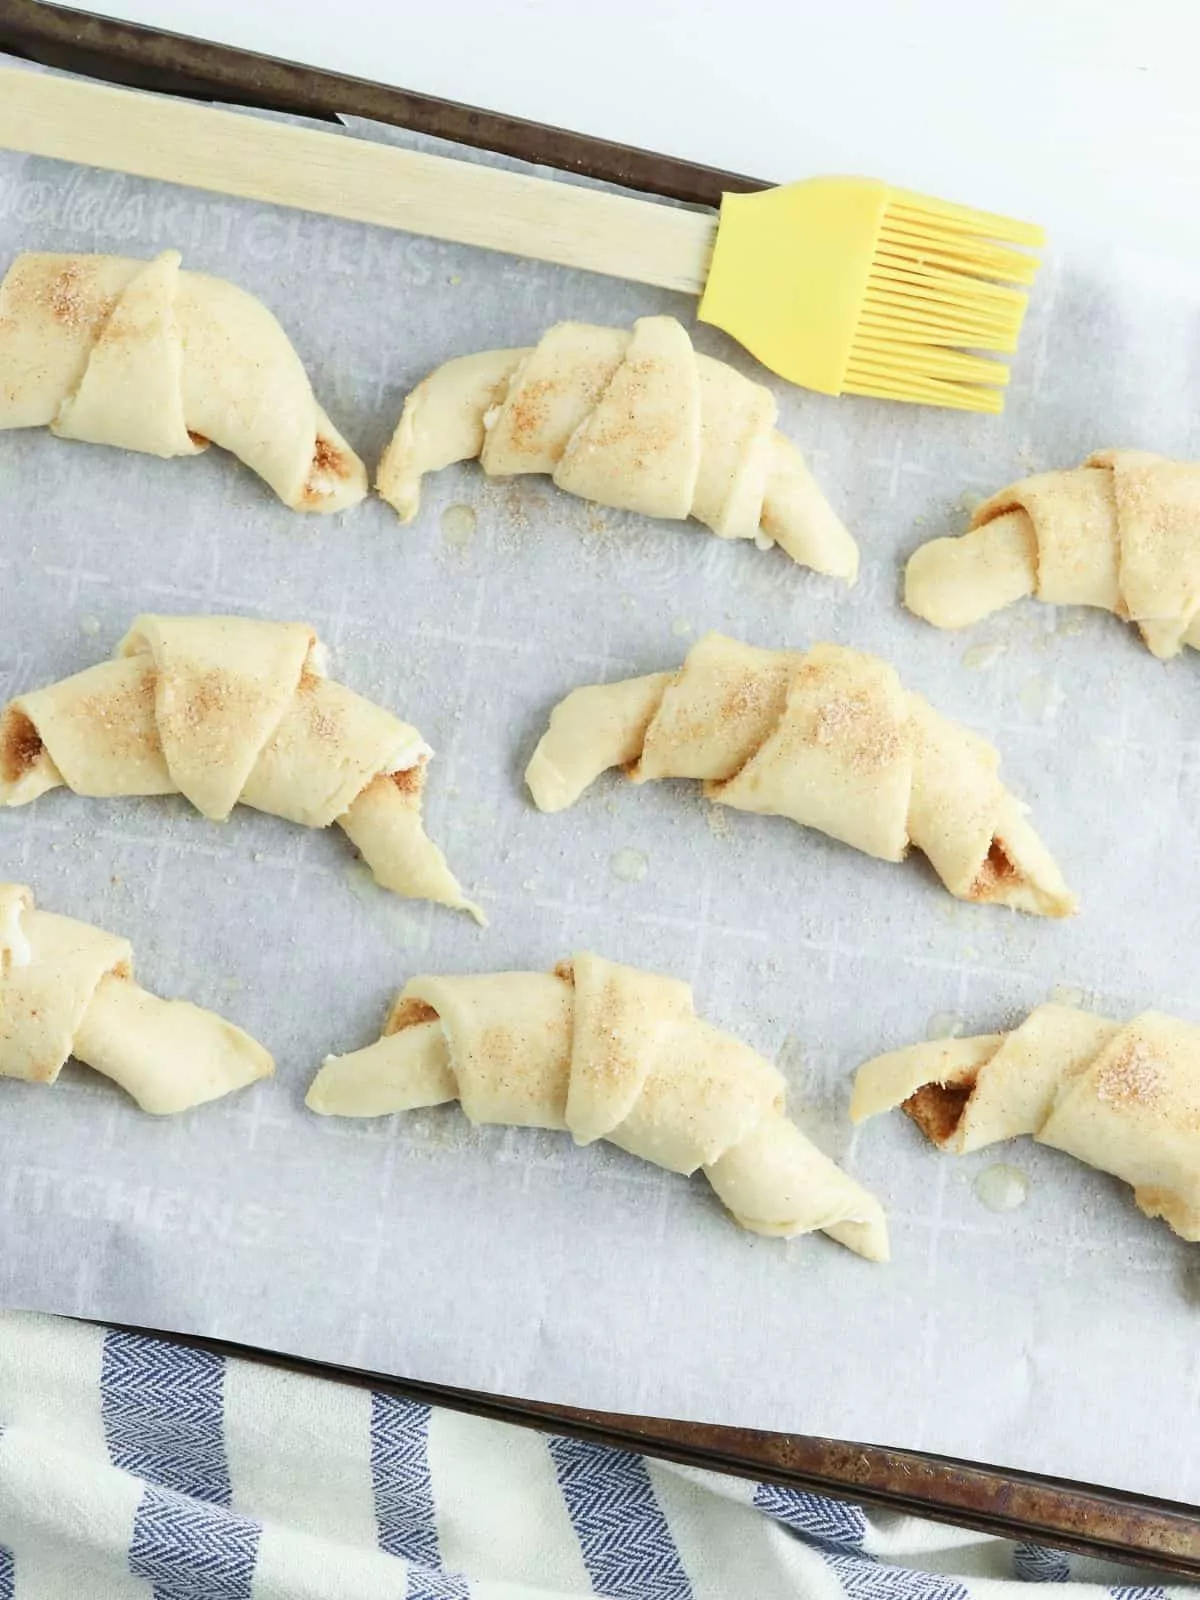 rolled up crescent rolls on baking tray lined with parchment paper.